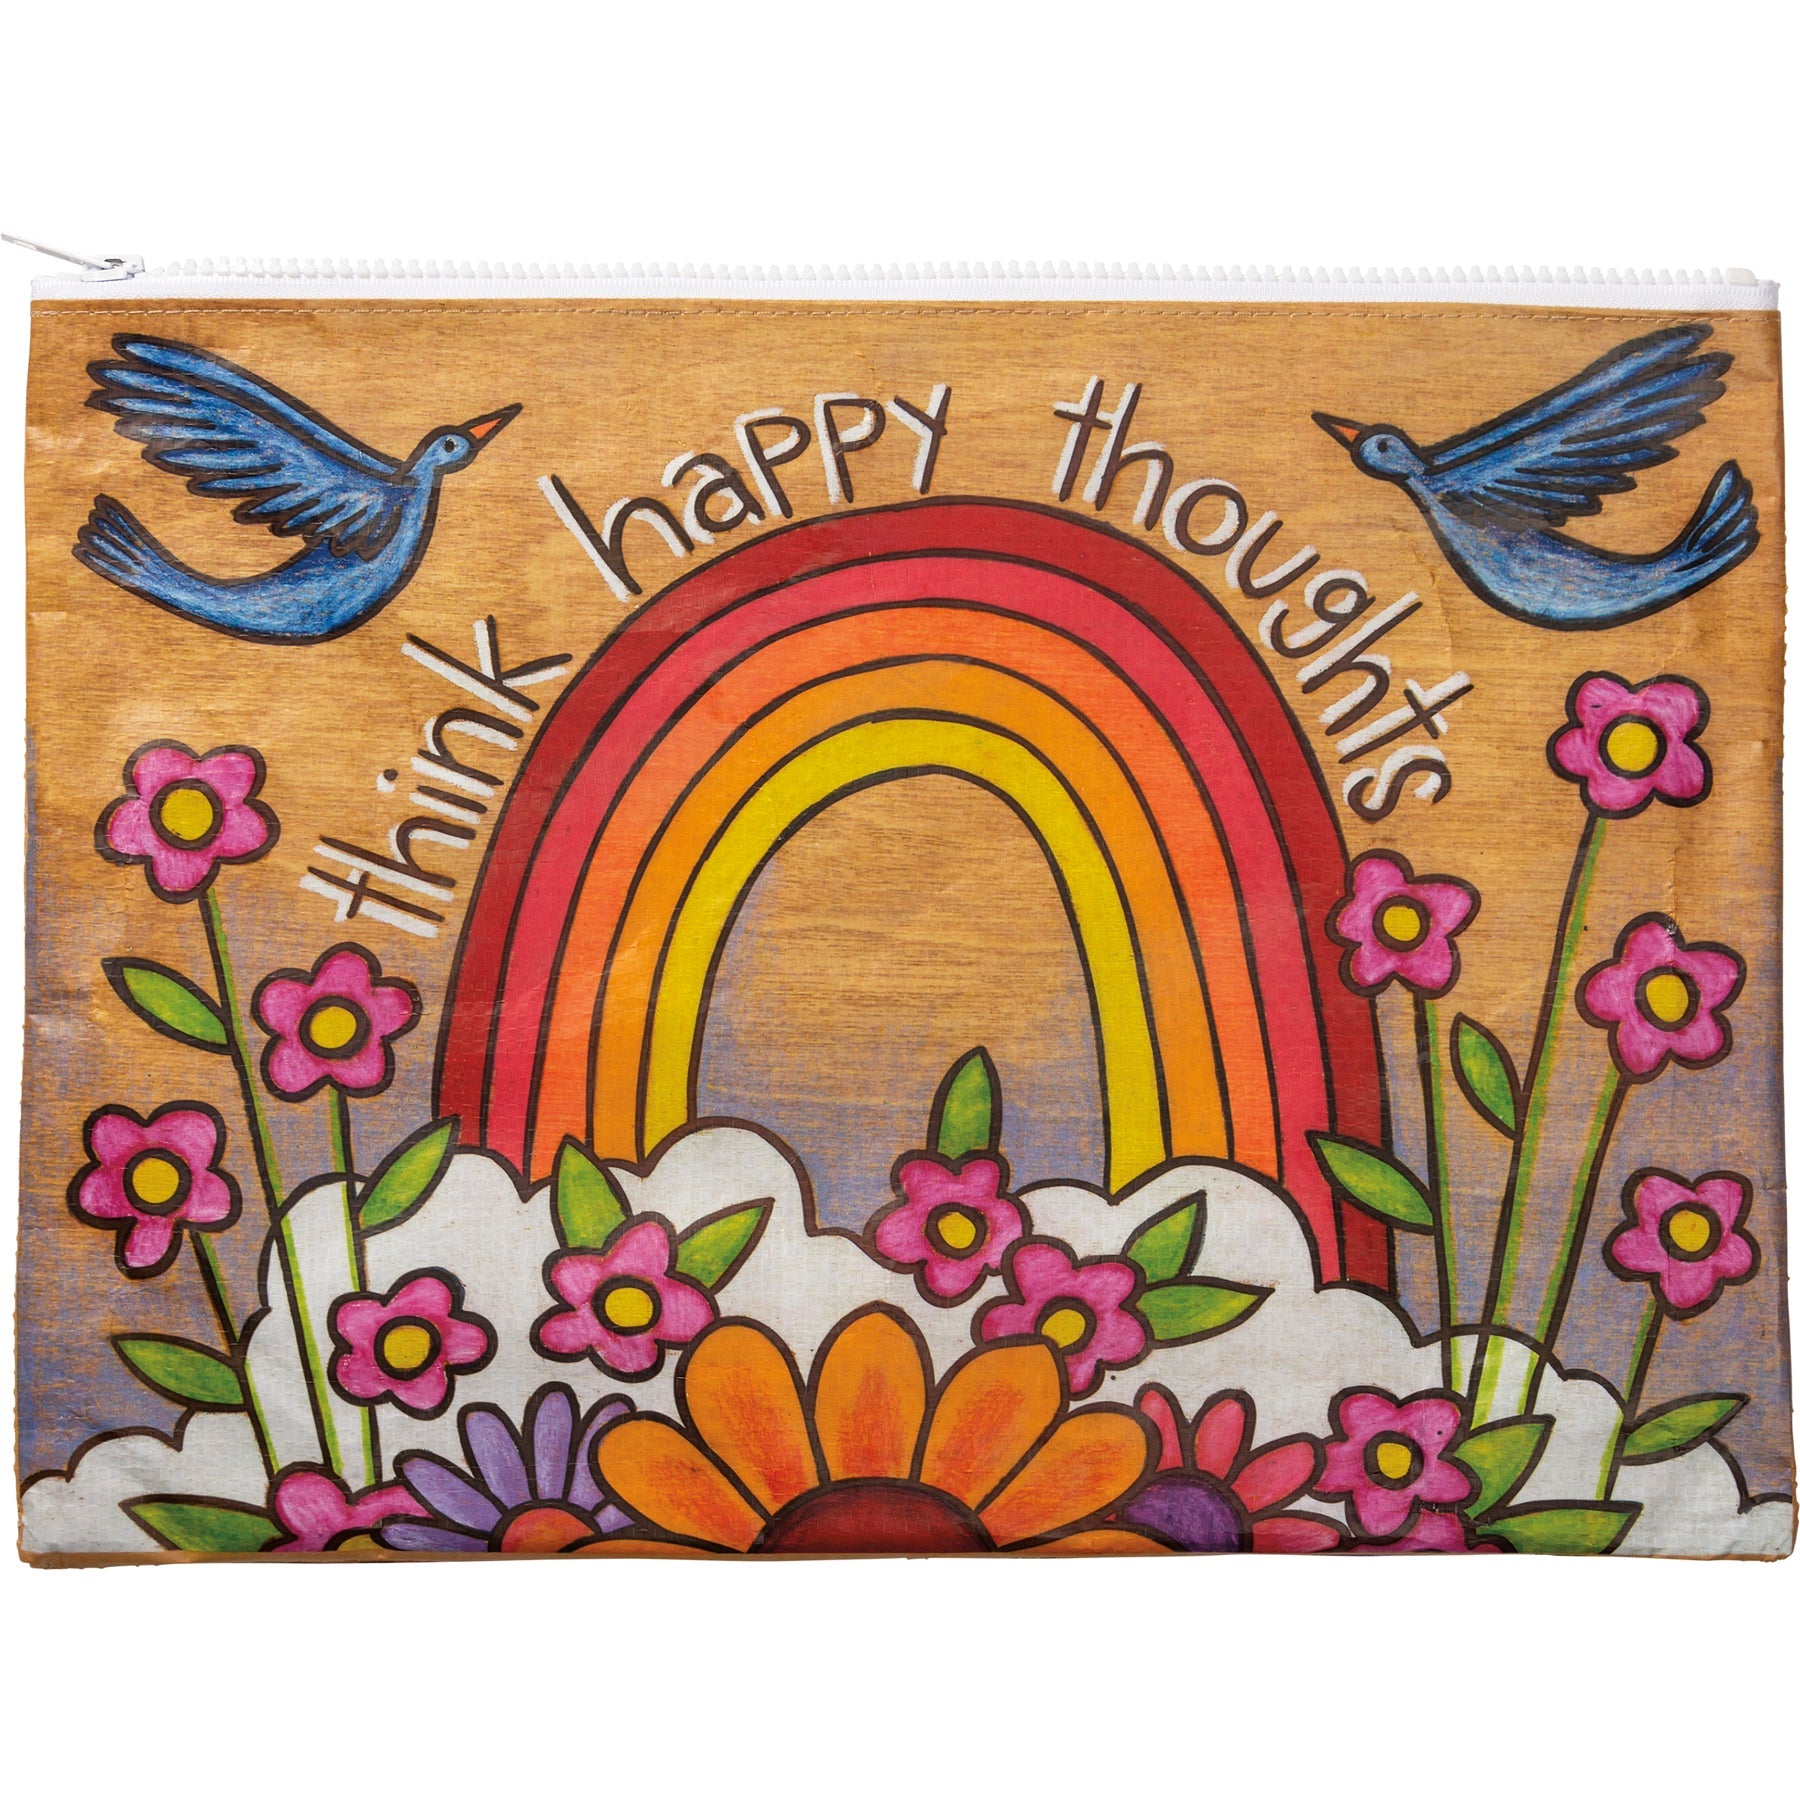 Think Happy Thoughts Zipper Folder in Rainbow and Flowers Design | Organizer Pouch Recycled Material | 14.25" x 10"